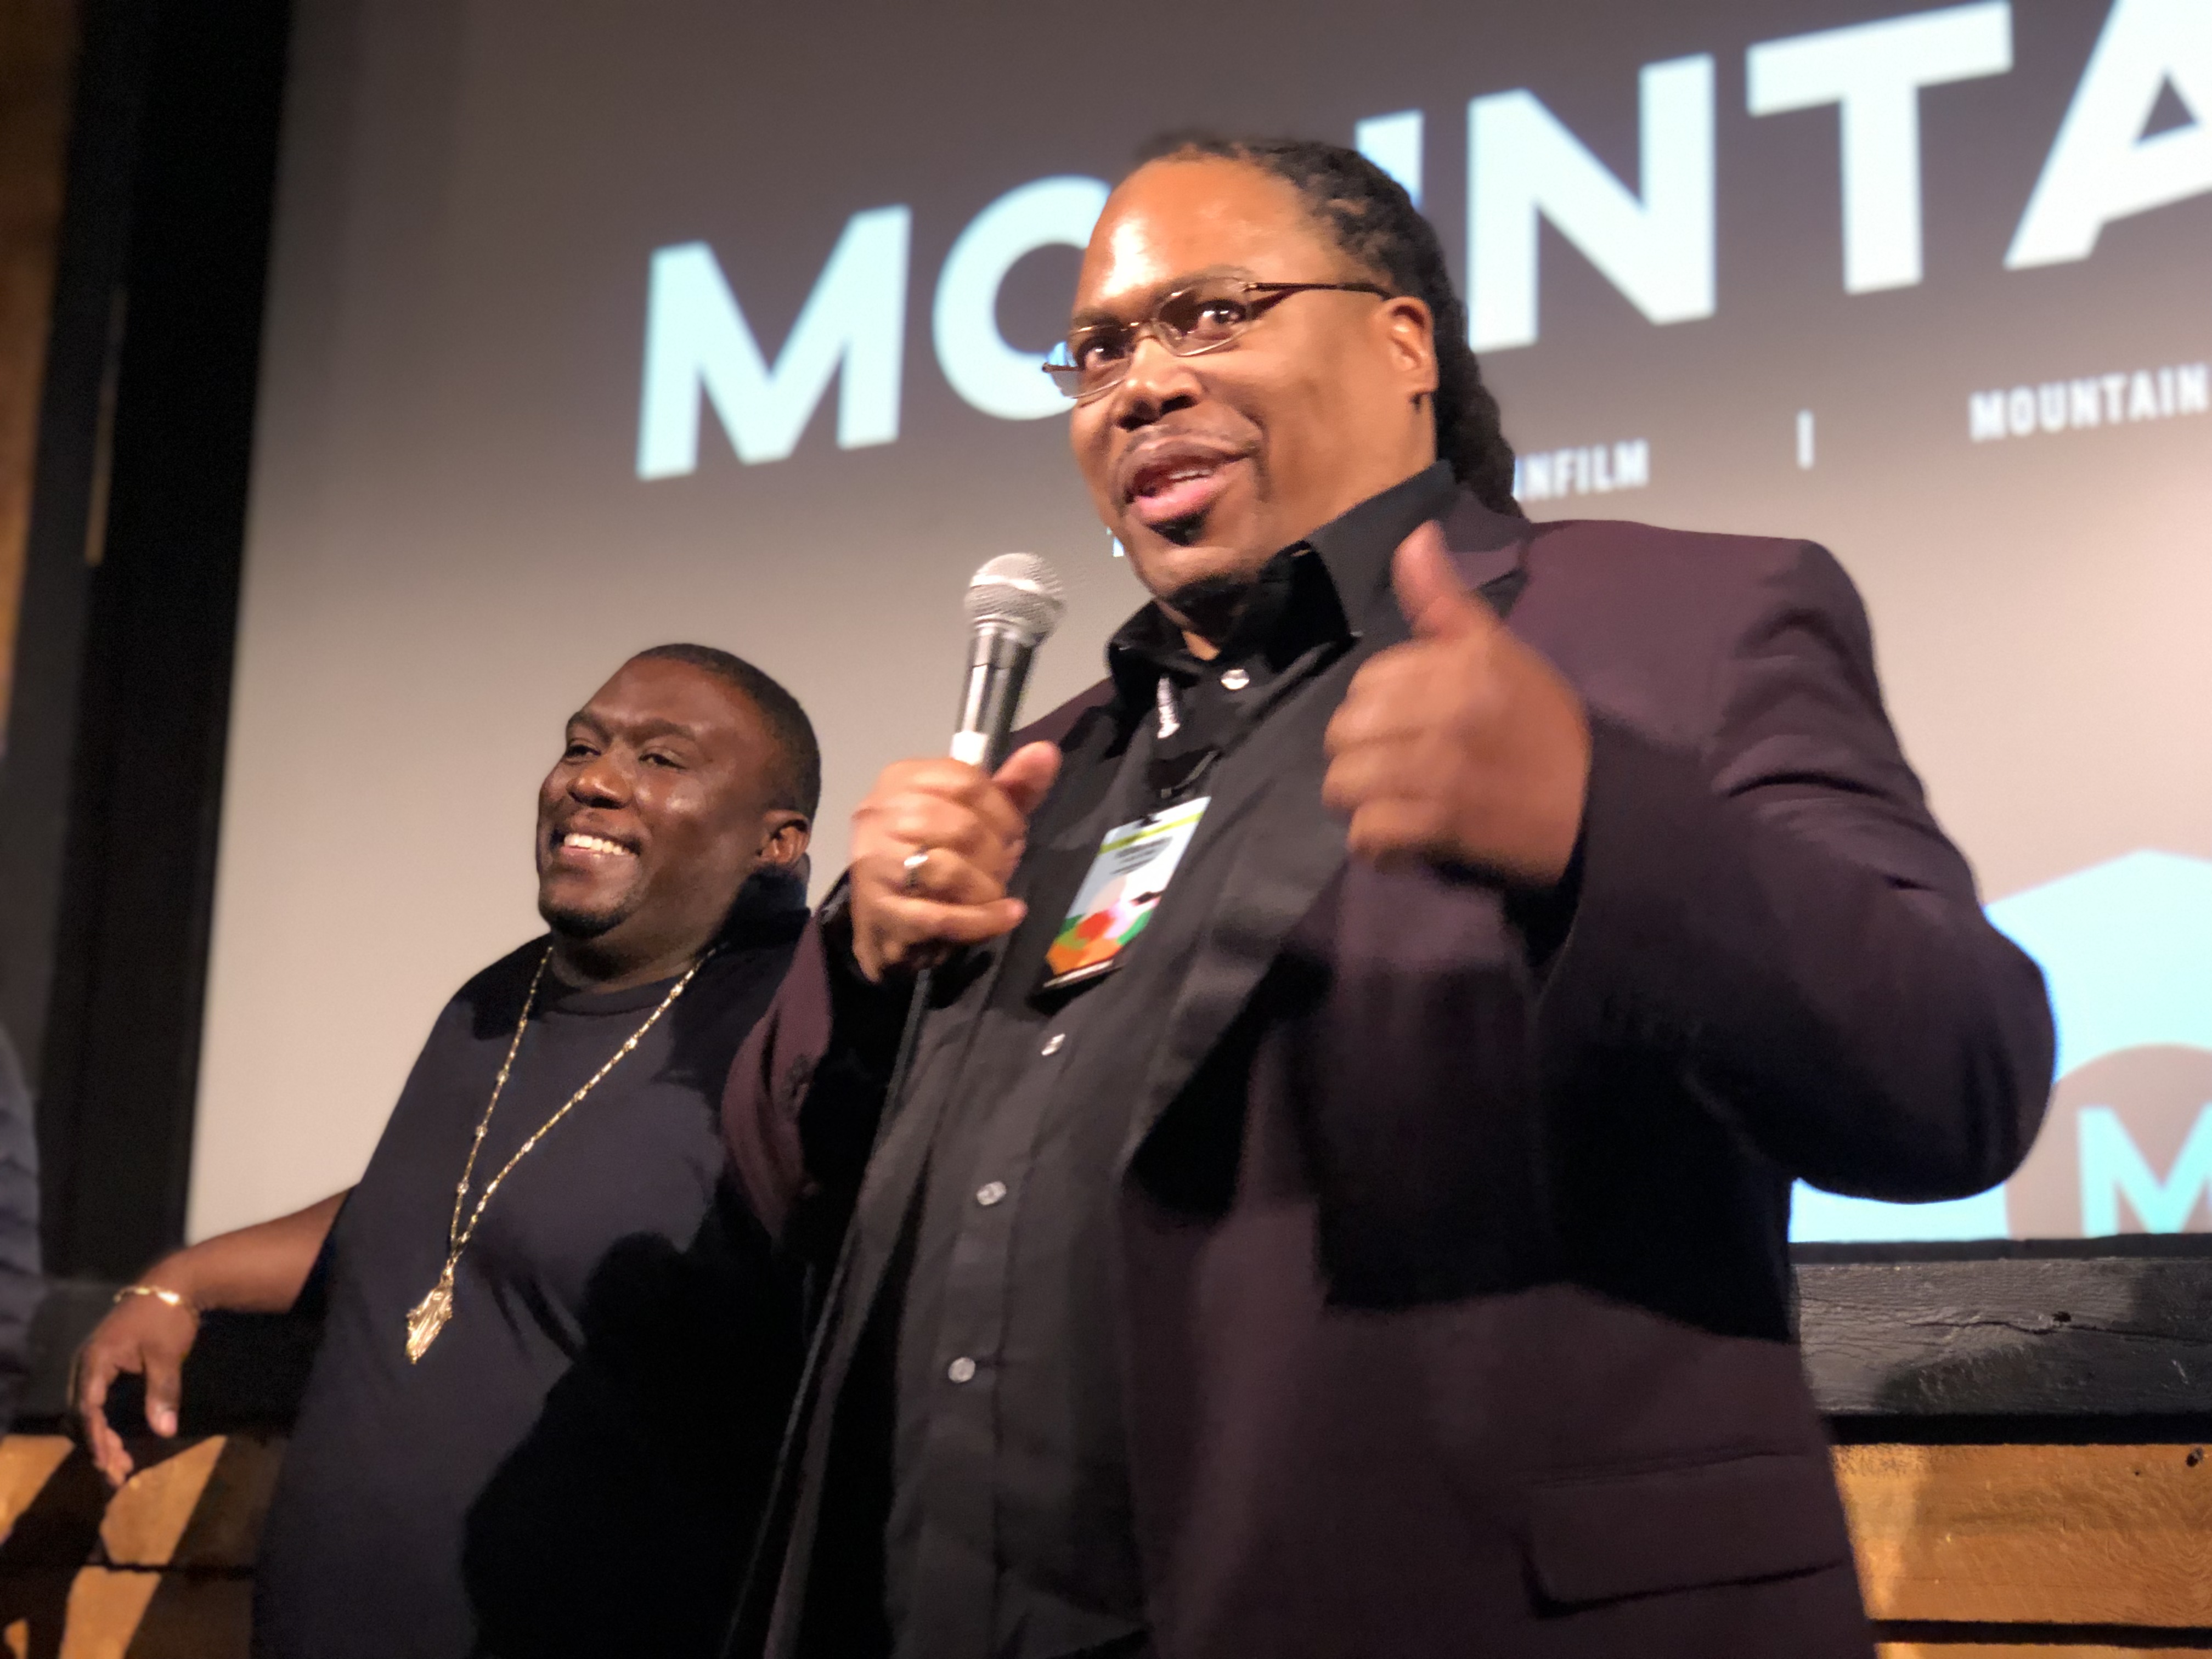 From left, William Smith and Richard White, subjects of the film R.A.W. Tuba, answer audience questions at the Nugget Theatre following a live musical performance. [Photo courtesy of Mountainfilm]